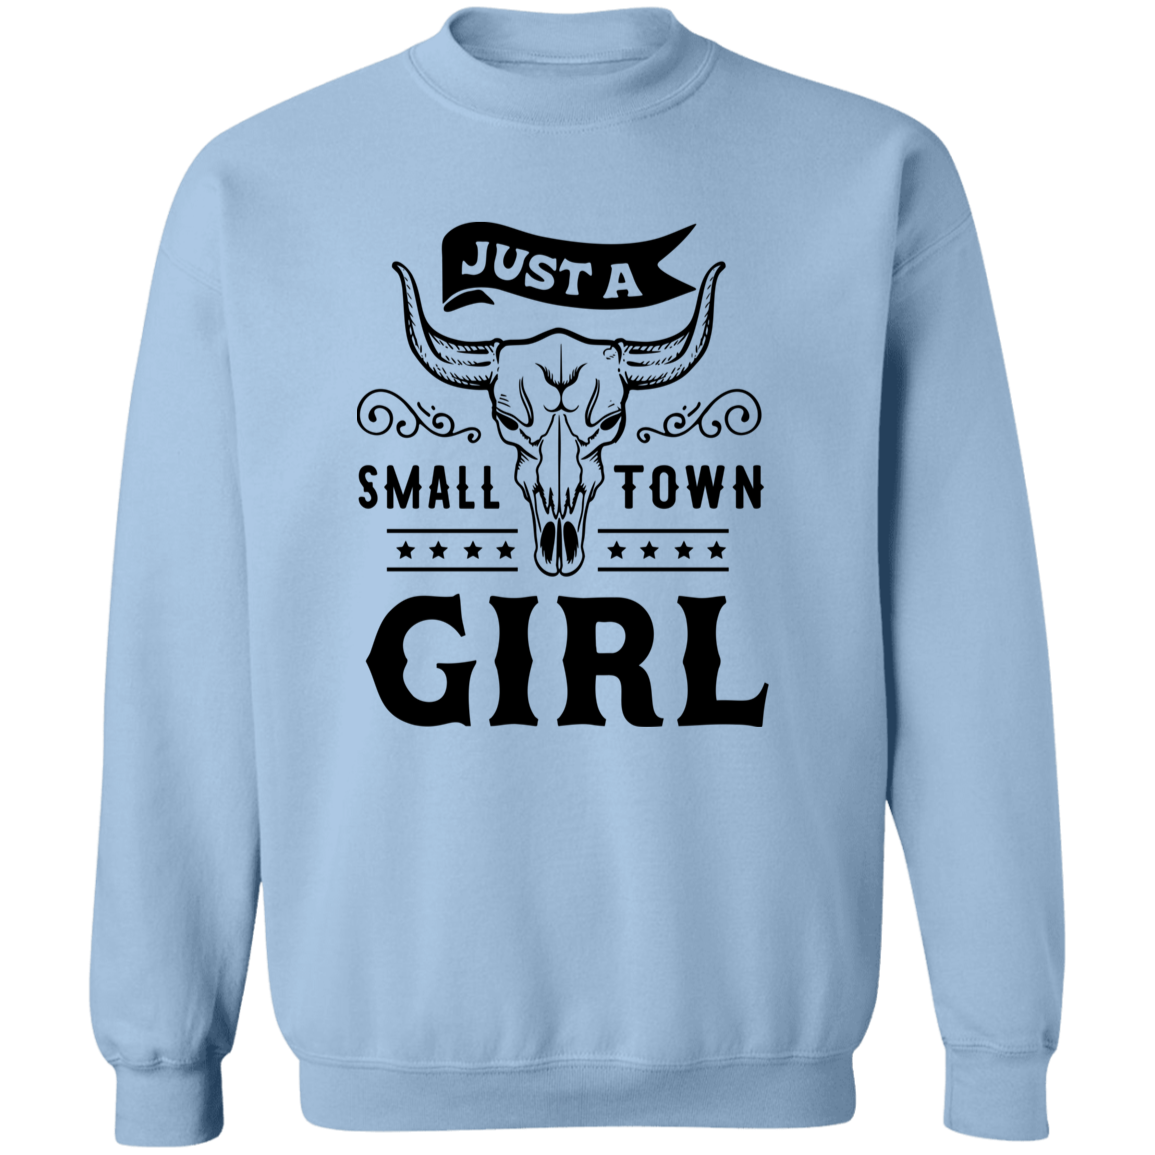 Just A Small Town Girl 1 G180 Crewneck Pullover Sweatshirt